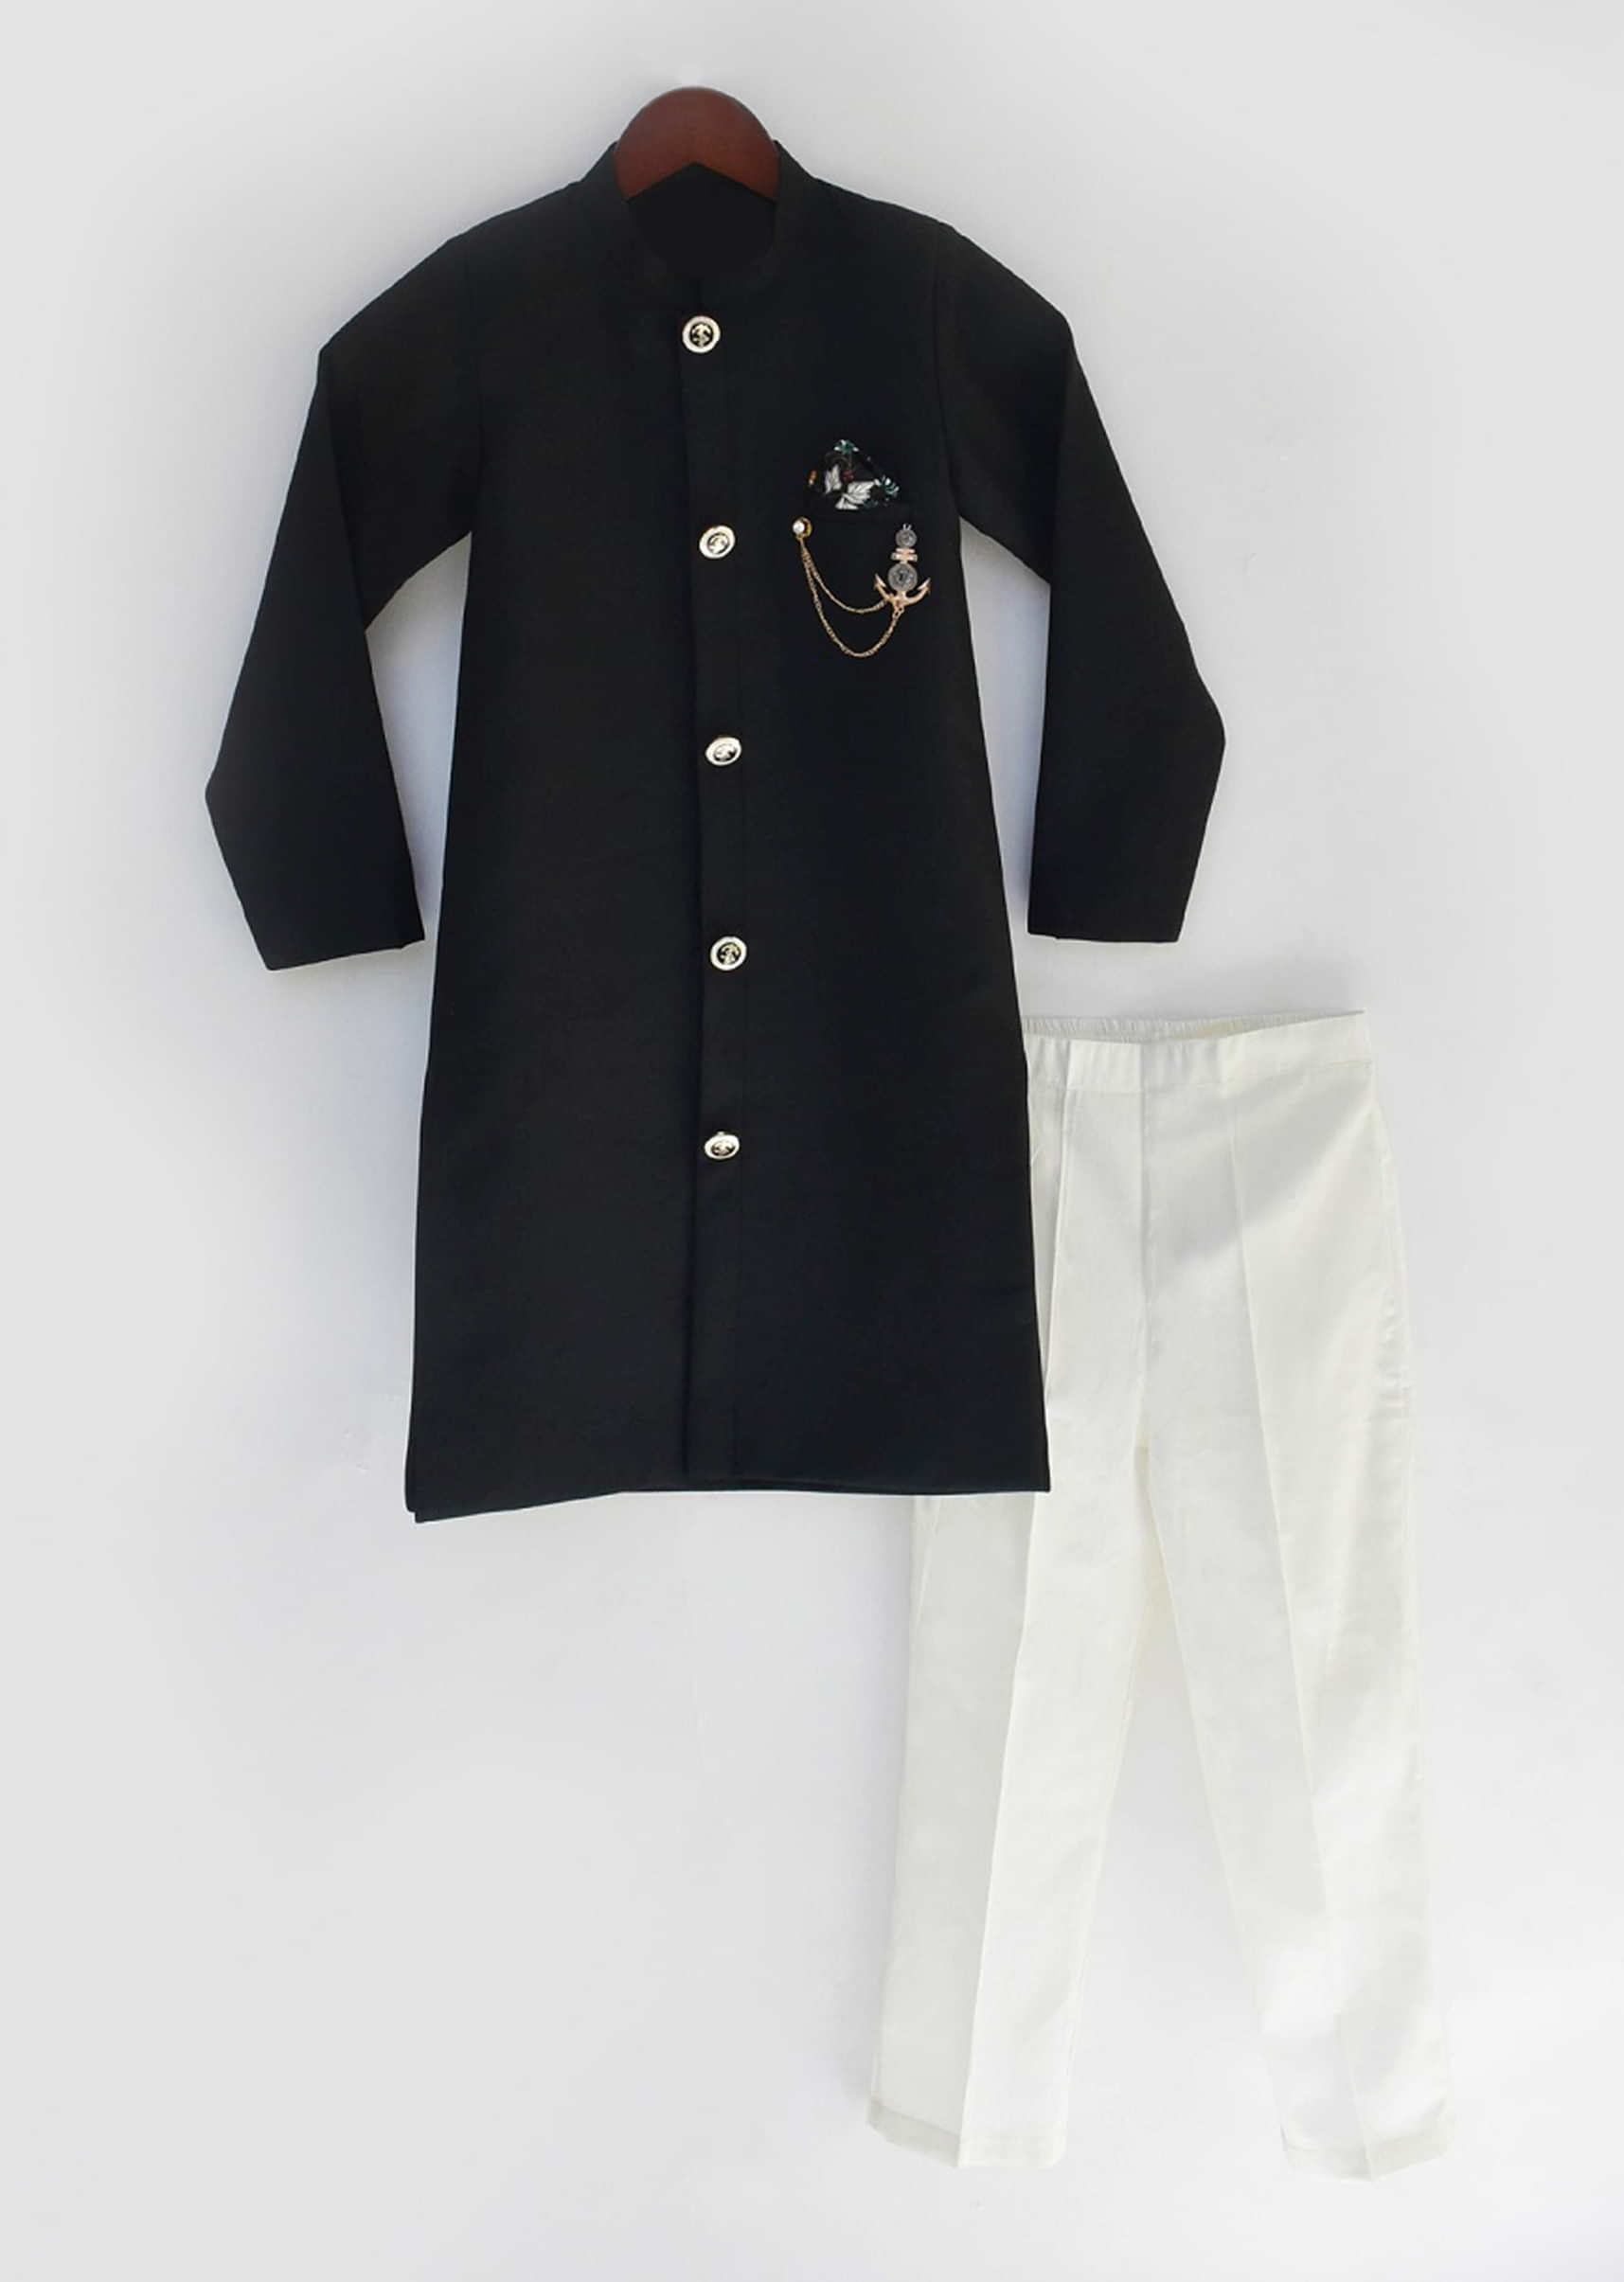 Kalki Boys Black ajkan set with golden brooch and white silk pants by fayon kids